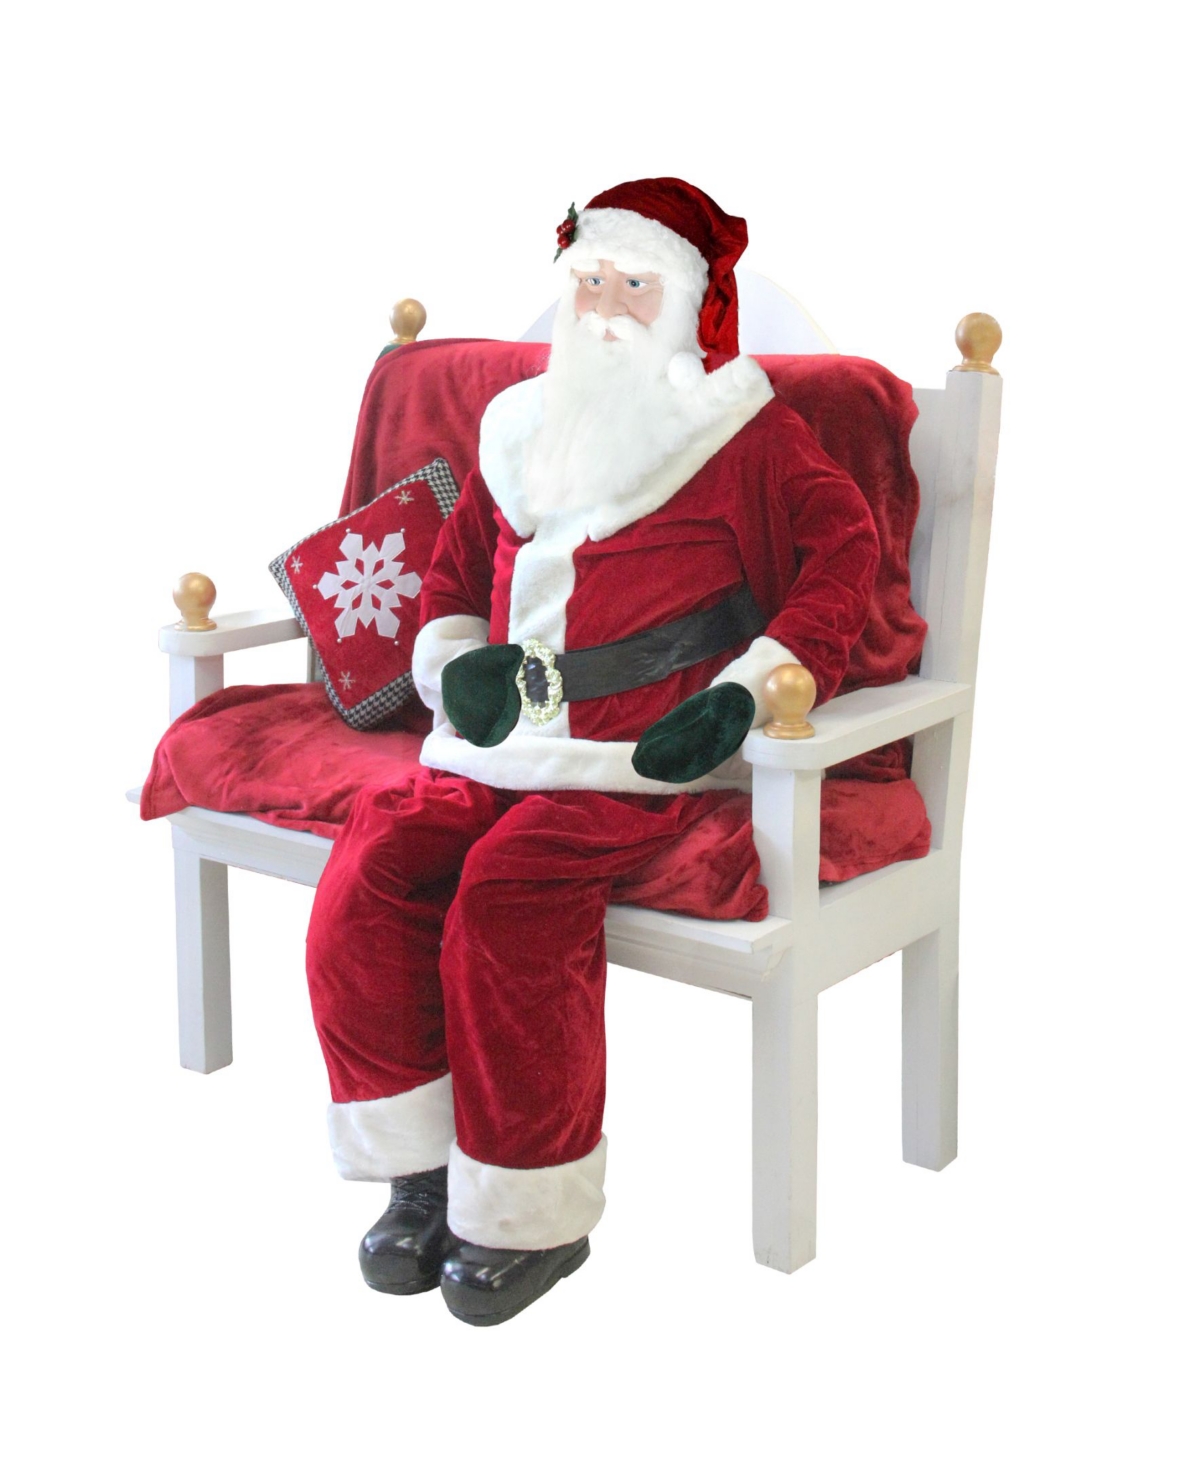 6' Life-Size Santa Claus - Red